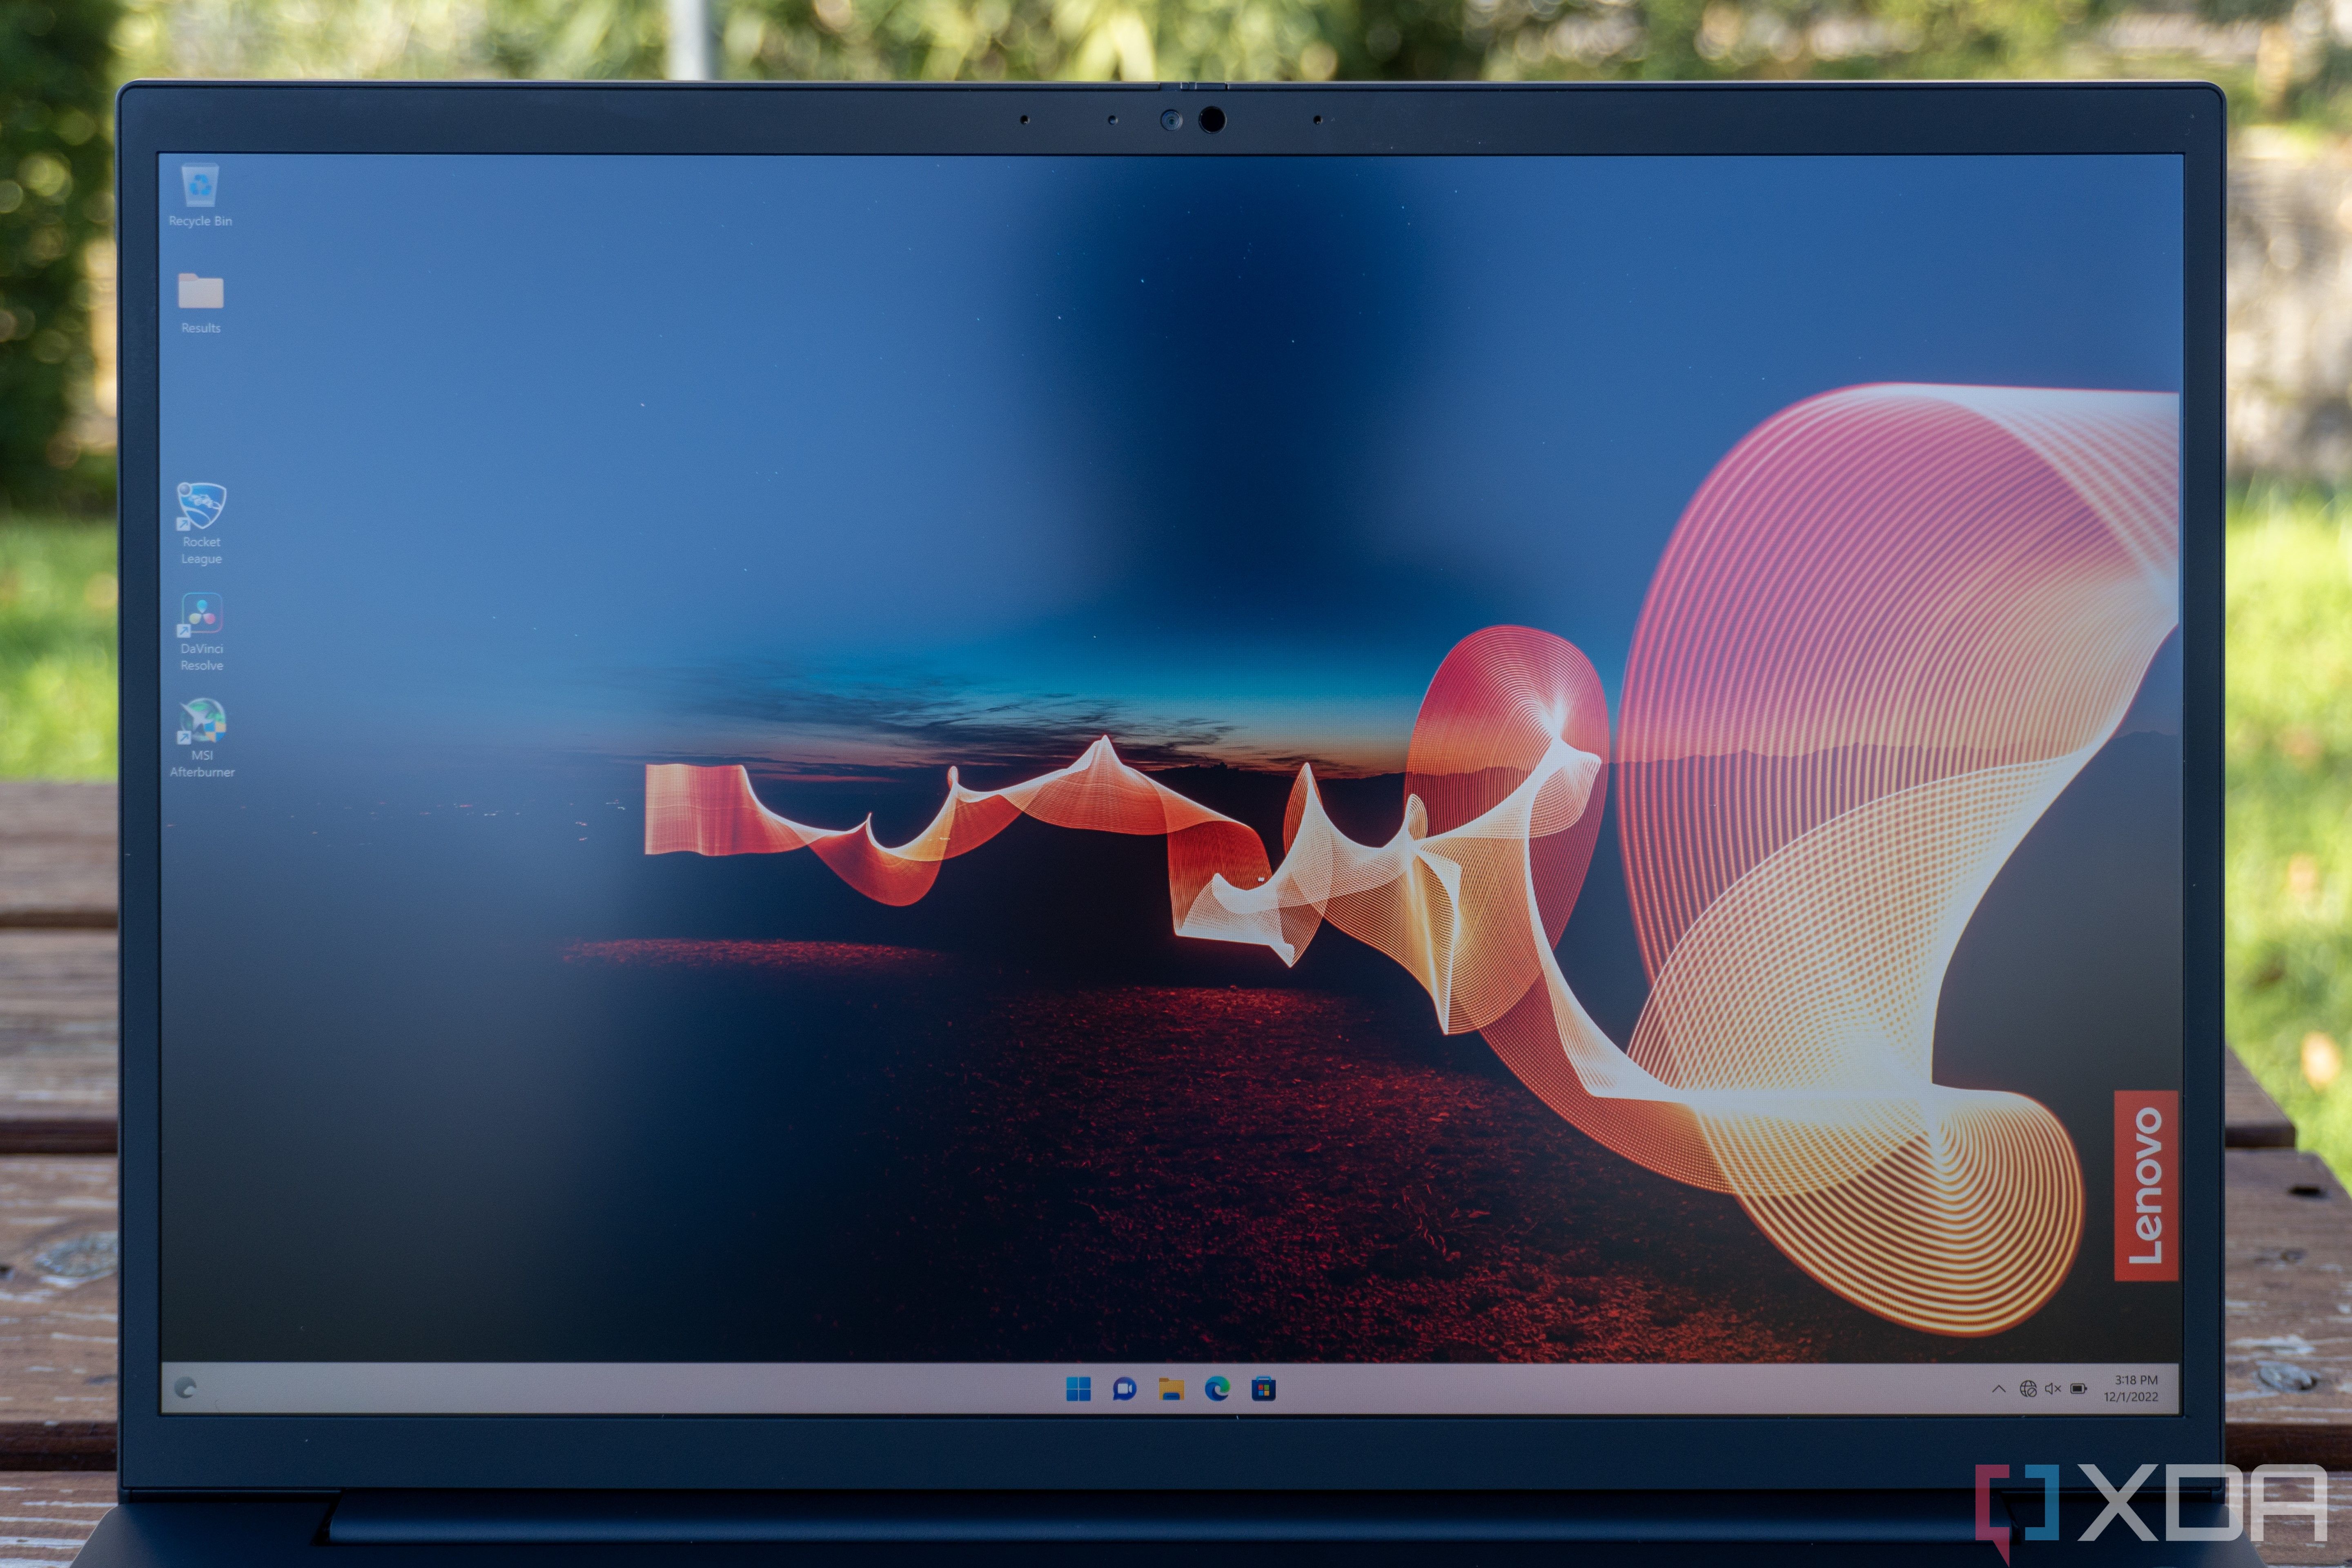 Close-up view of the display on the Lenovo ThinkPad X1 Extreme Gen 5 showing the default desktop background